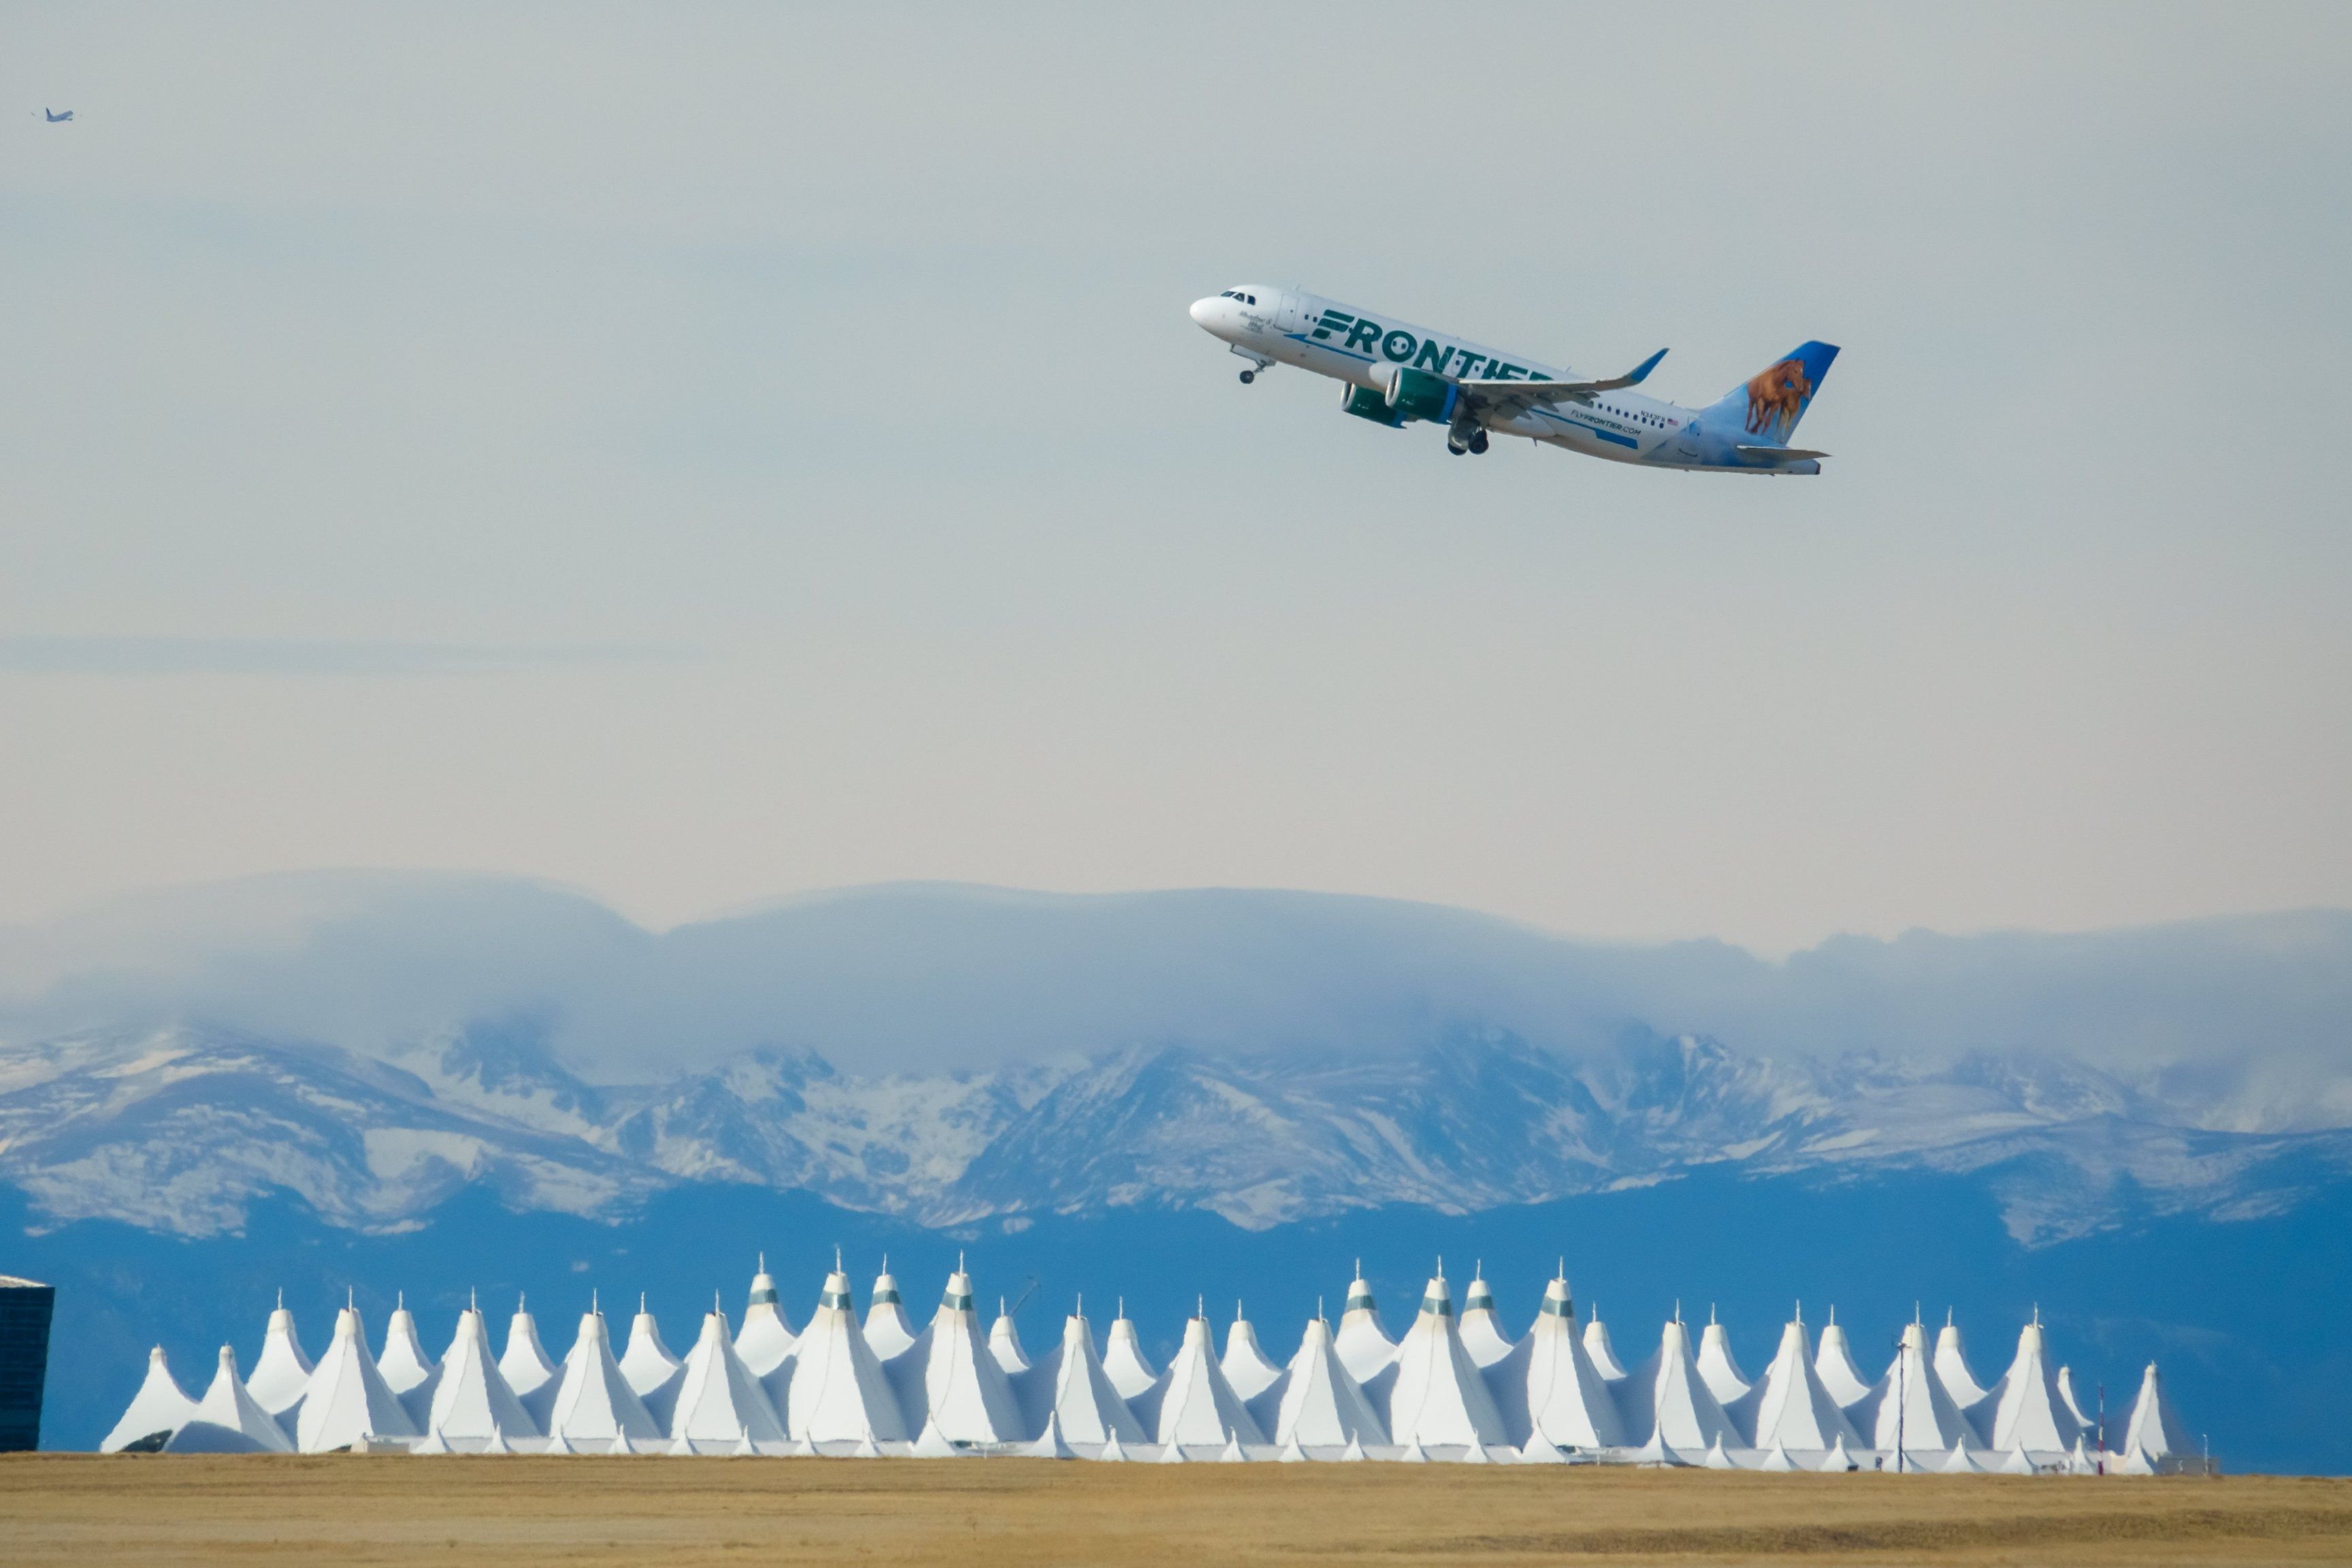 Frontier Airlines Airbus A320neo departing from Denver International Airport. 